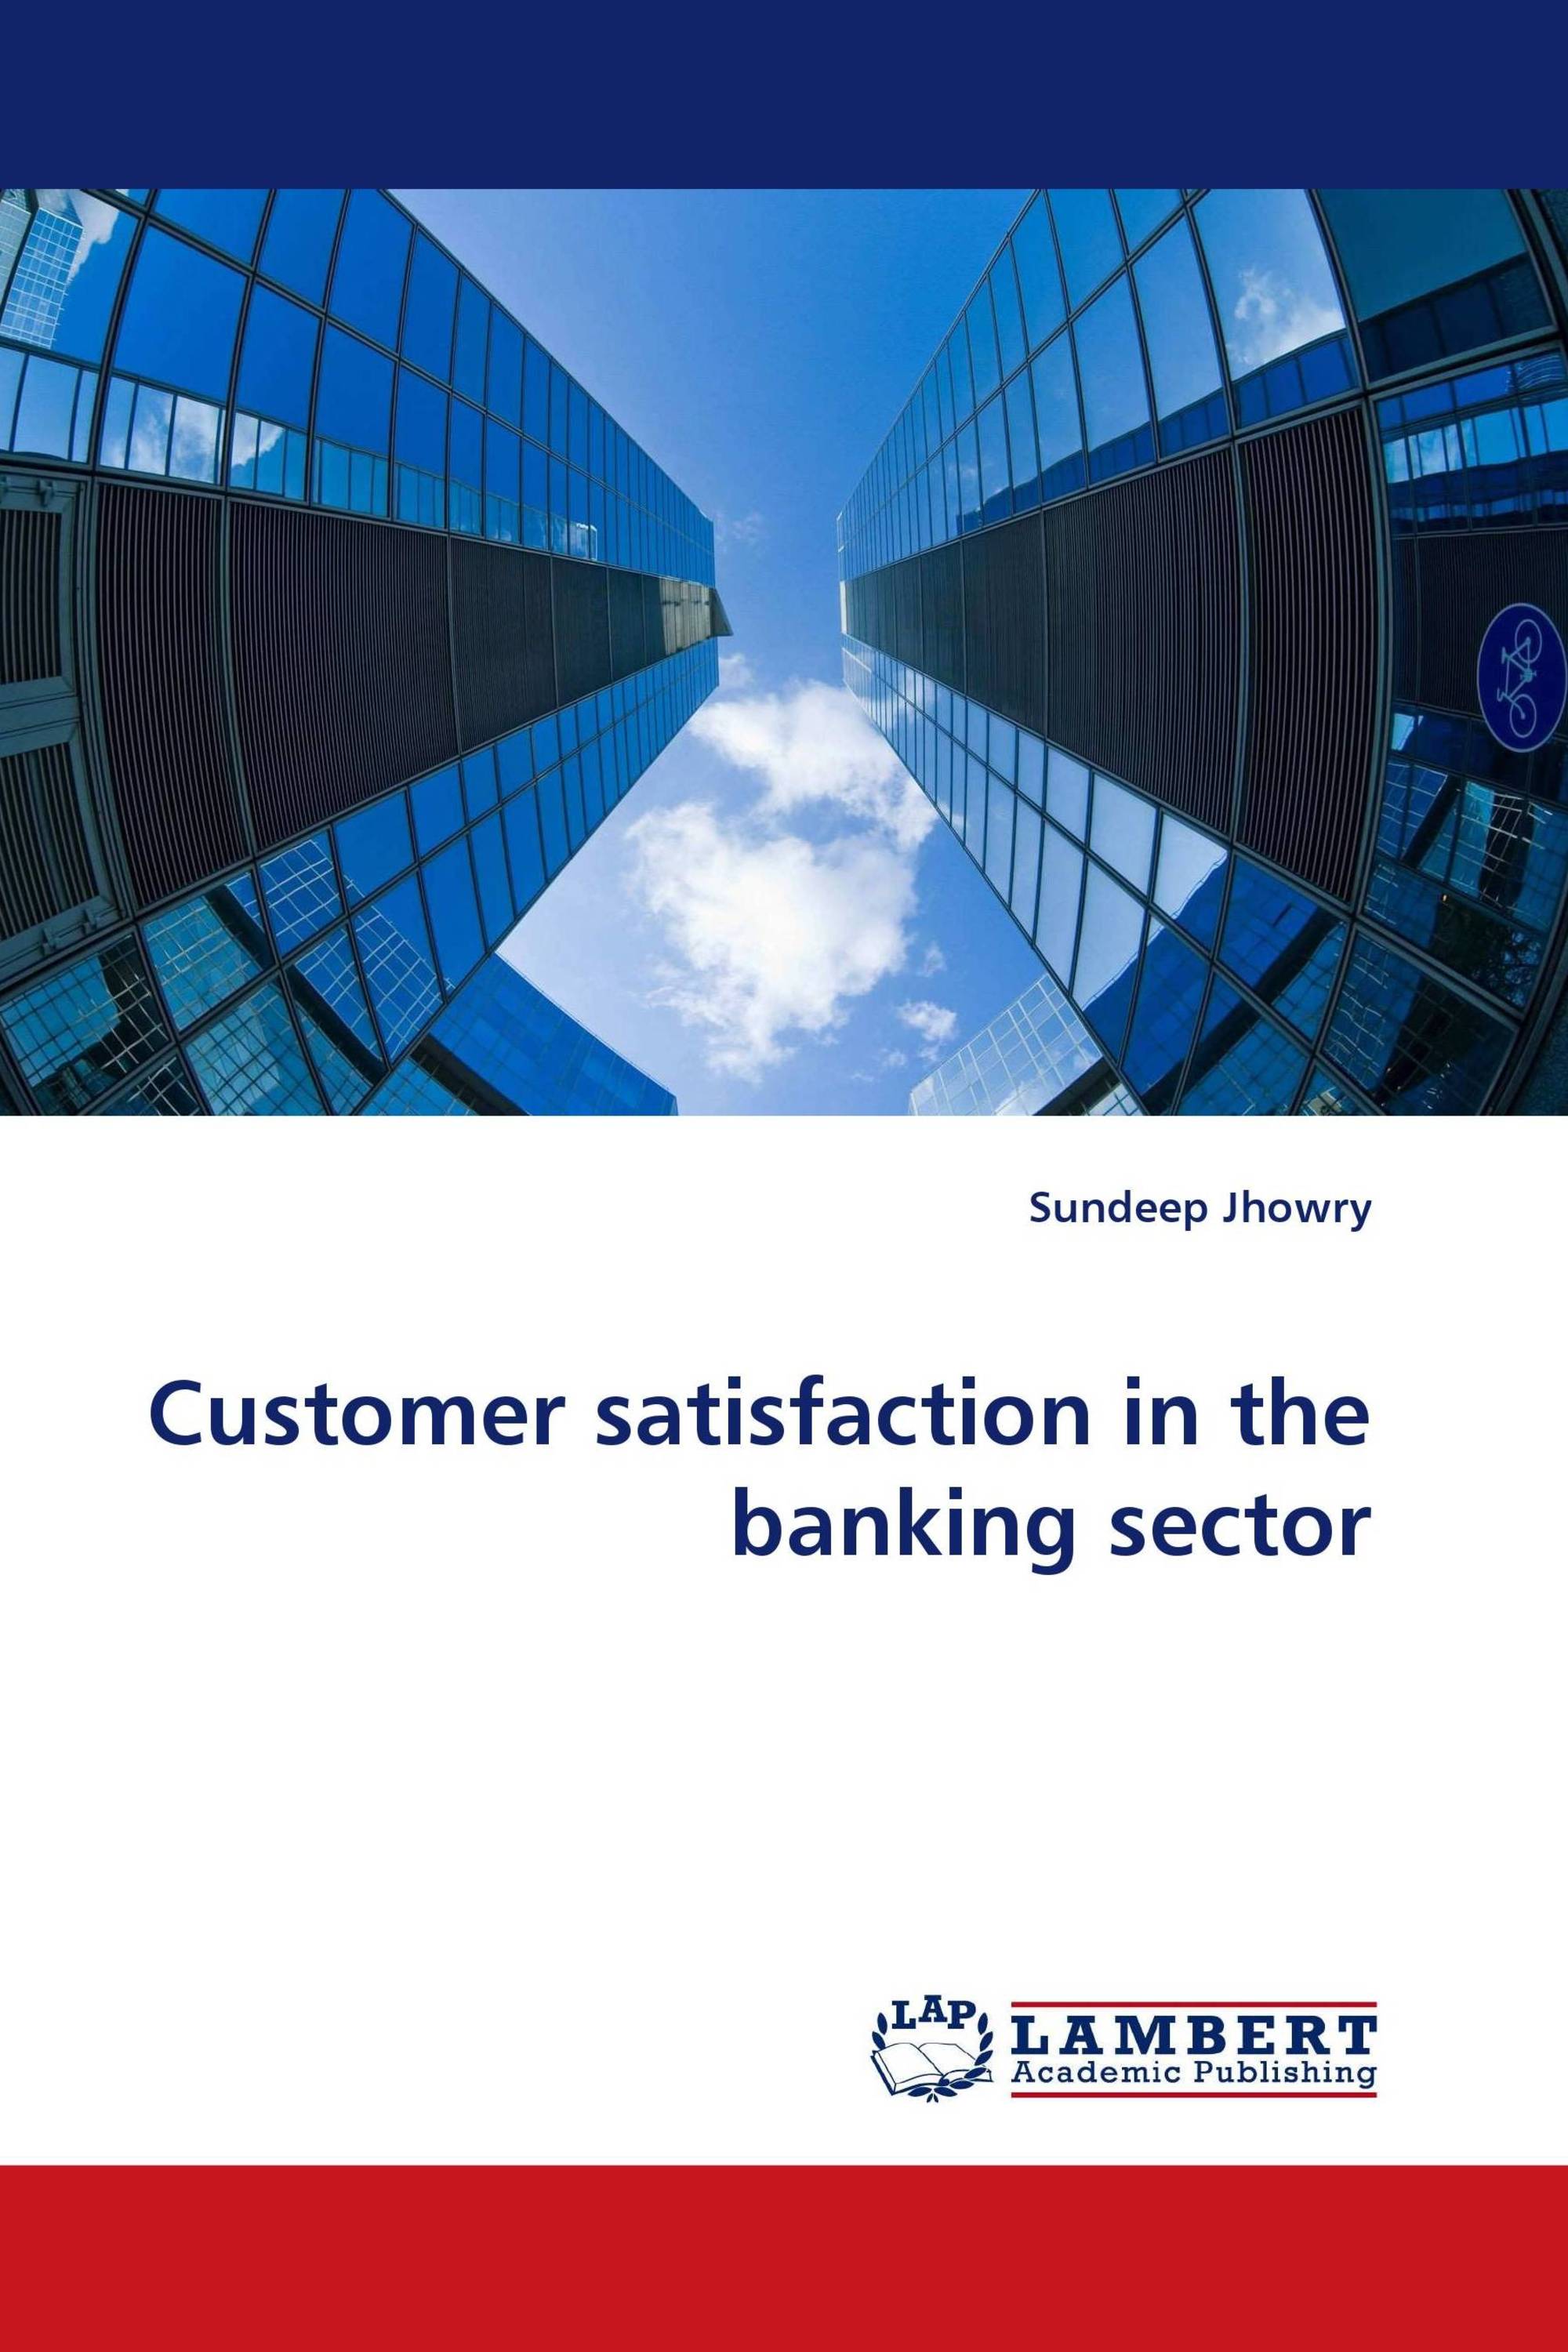 research on customer satisfaction in banking sector